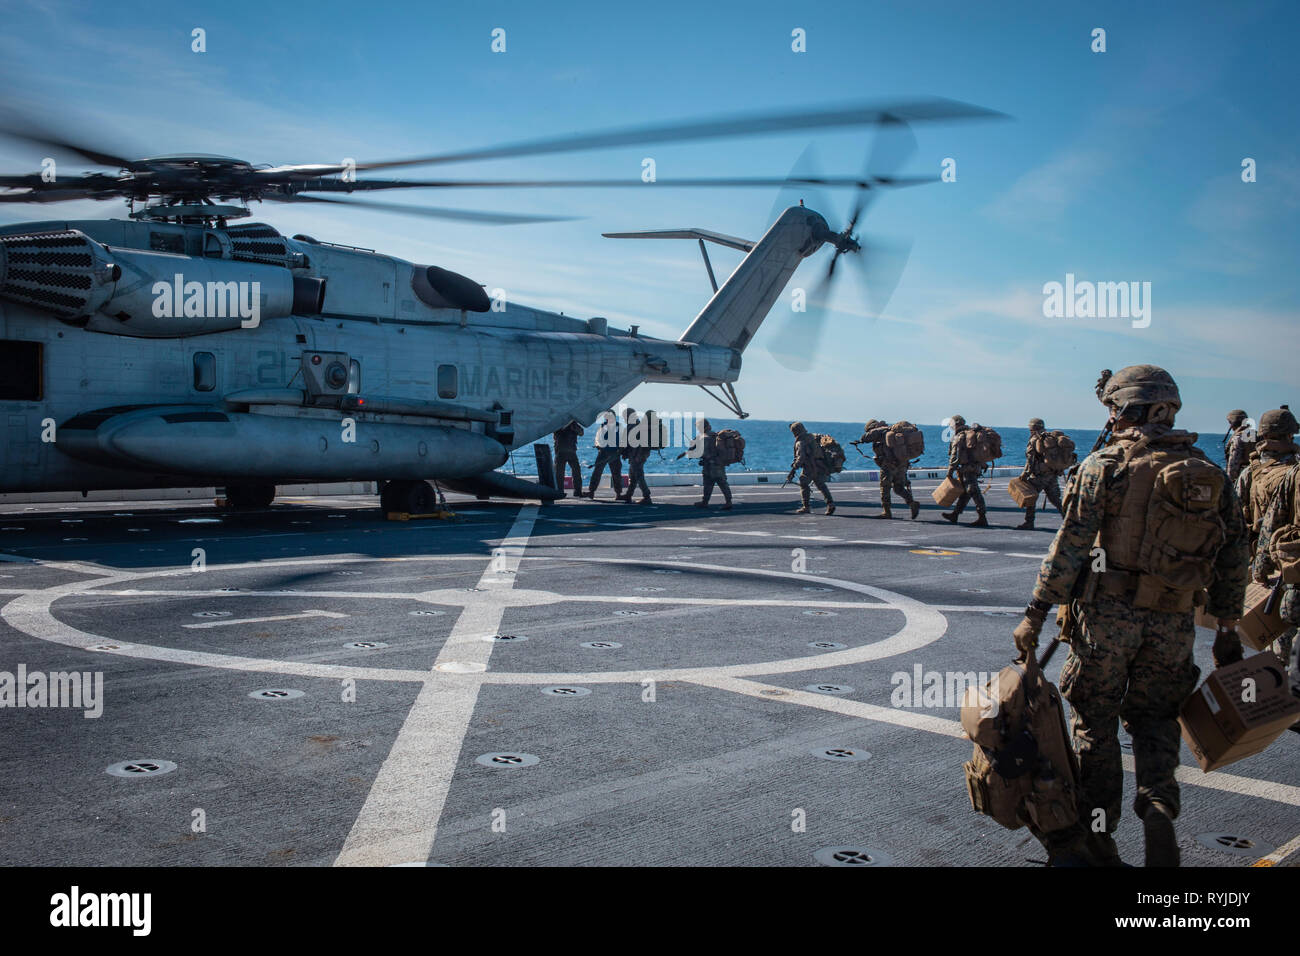 190222-M-ET529-1143 PACIFIC OCEAN (Feb. 22, 2019) U.S. Marines with Kilo Company, Battalion Landing Team 3rd Battalion, 5th Marine Regiment, 11th Marine Expeditionary Unit (MEU), board a CH-53E Super Stallion to depart the San Antonio-class amphibious transport dock ship USS John P. Murtha (LPD 26). The Marines and Sailors of the 11th MEU are conducting routine operations as part of the Boxer Amphibious Ready Group in the eastern Pacific Ocean. (U.S. Marine Corps photo by Lance Cpl. Israel Chincio) Stock Photo